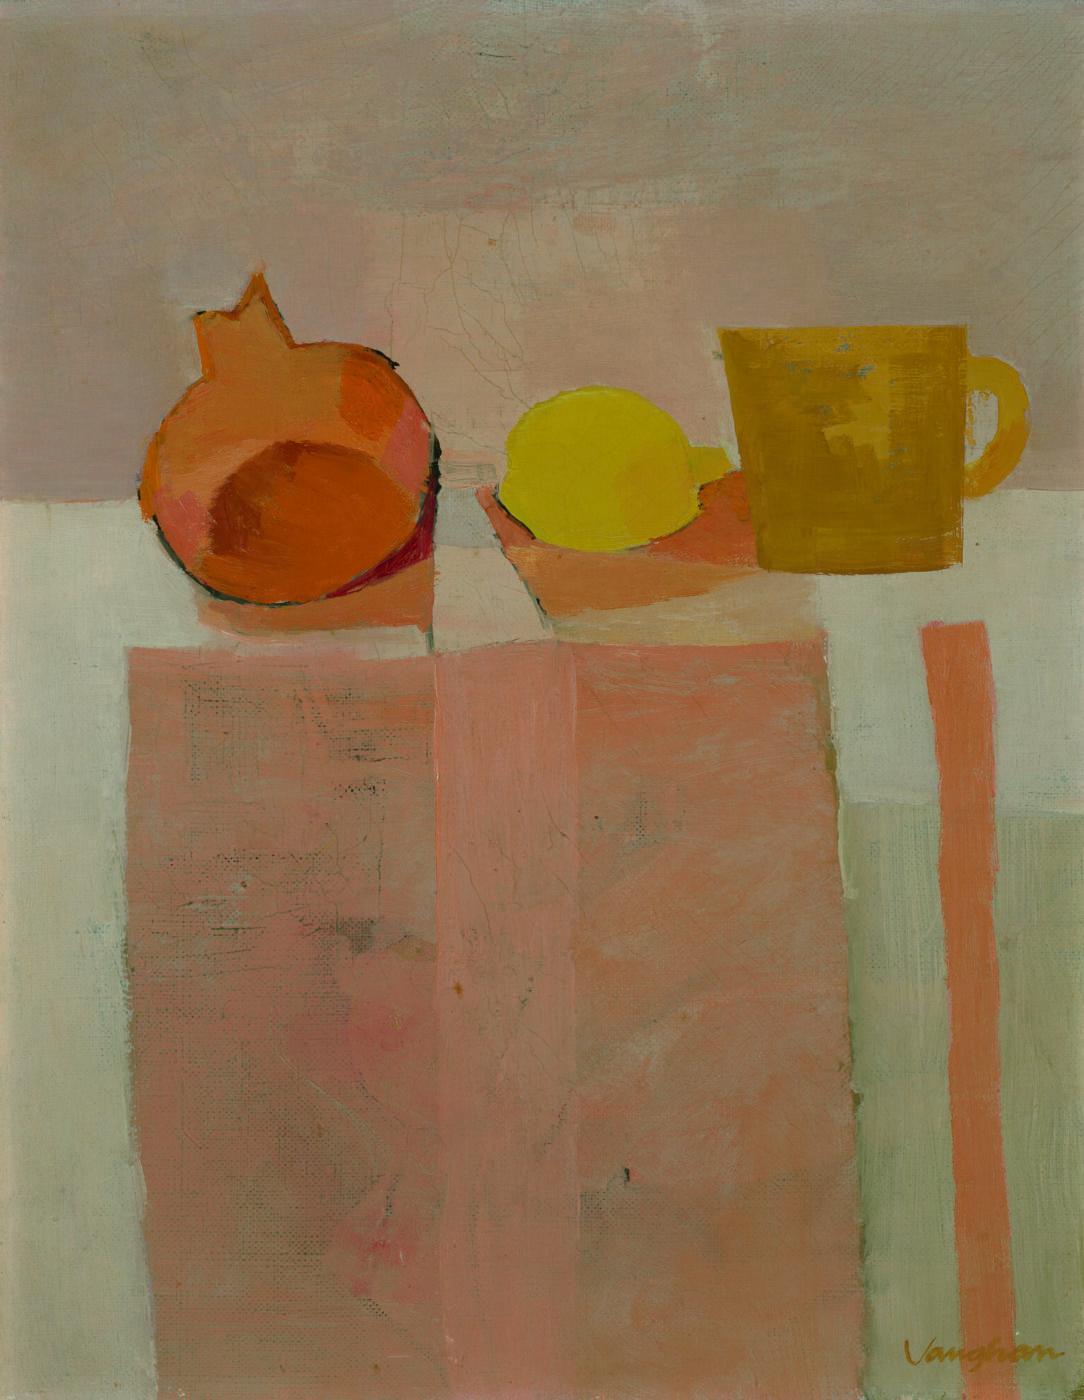 Keith Vaughan (1912-1977), Pomegranate, Lemon and Cup